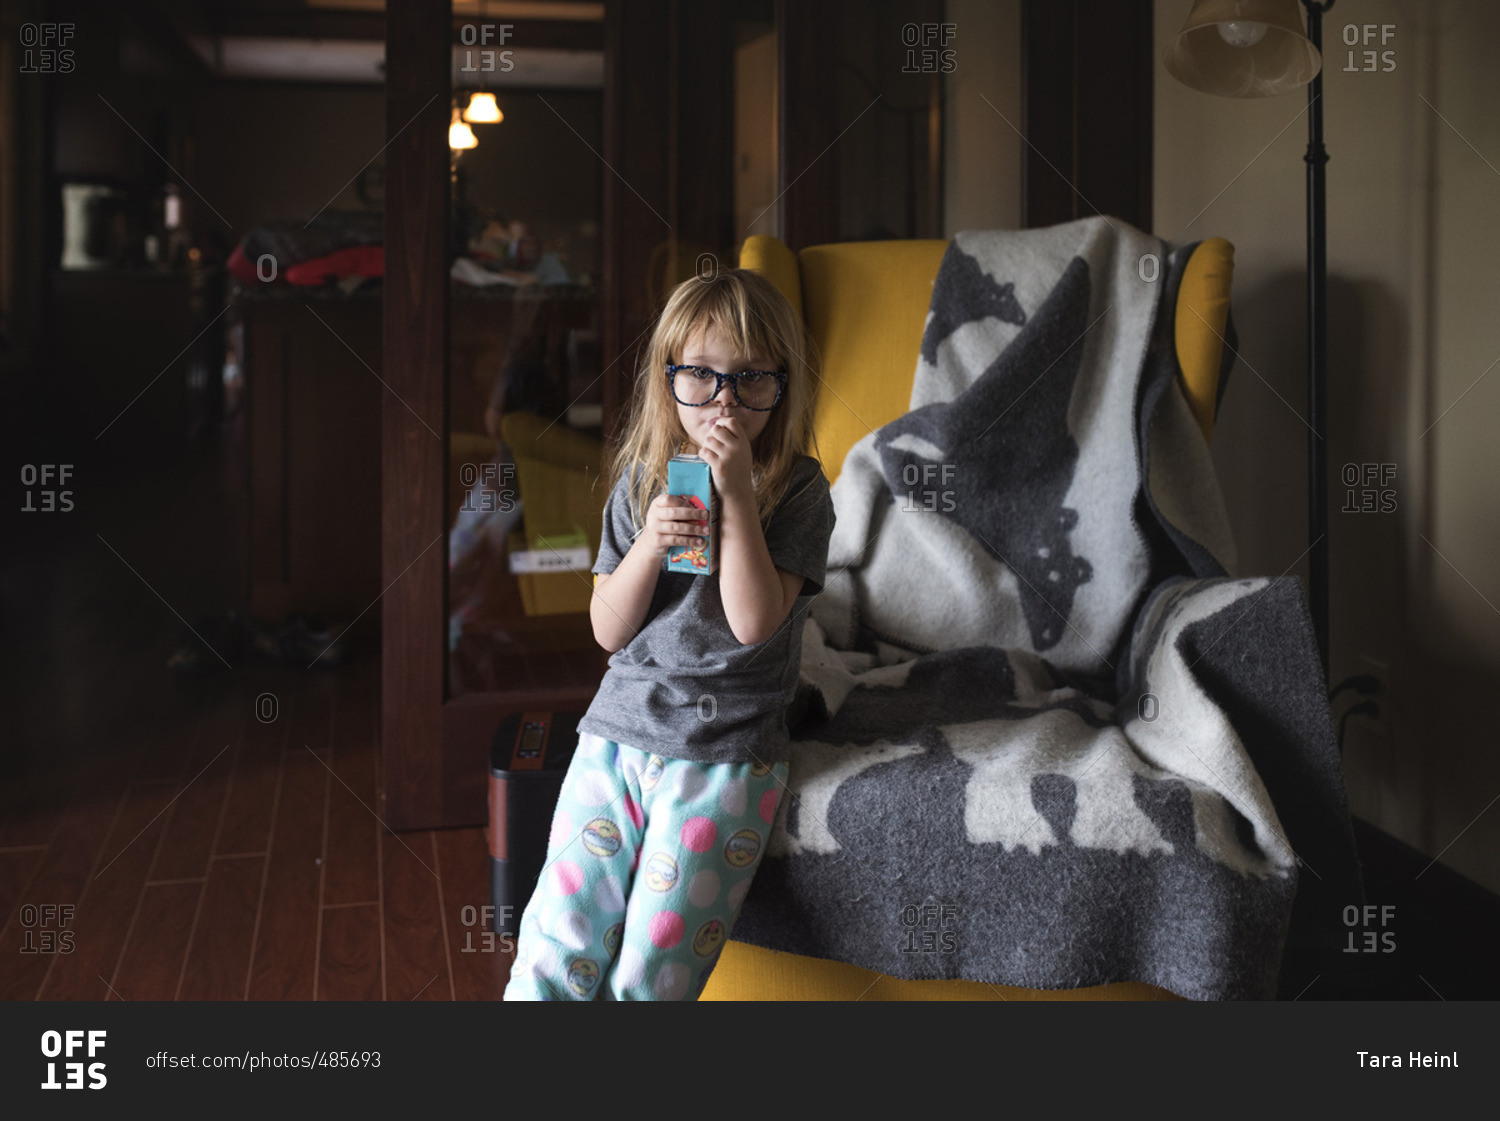 Girl in glasses drinking from juice box